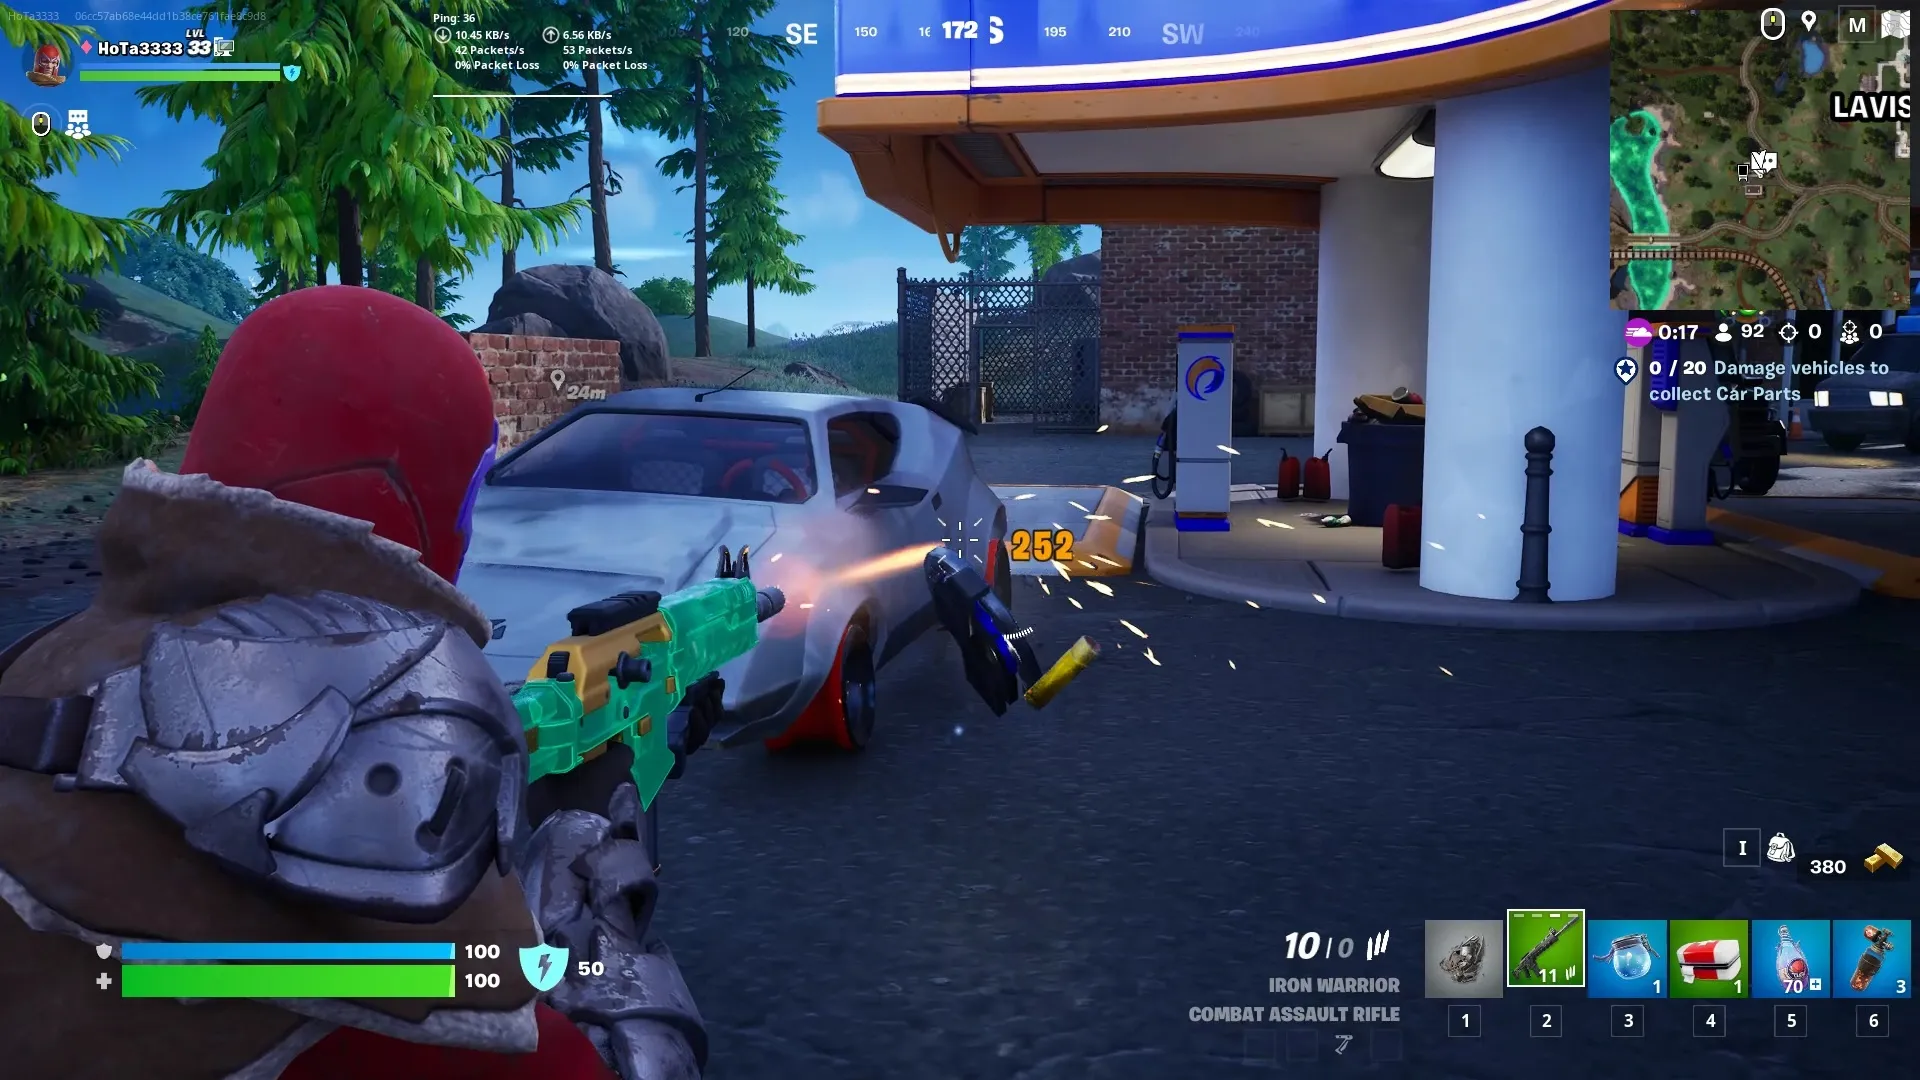 How to 'Damage Vehicles to Collect Car Parts' Fast in Fortnite